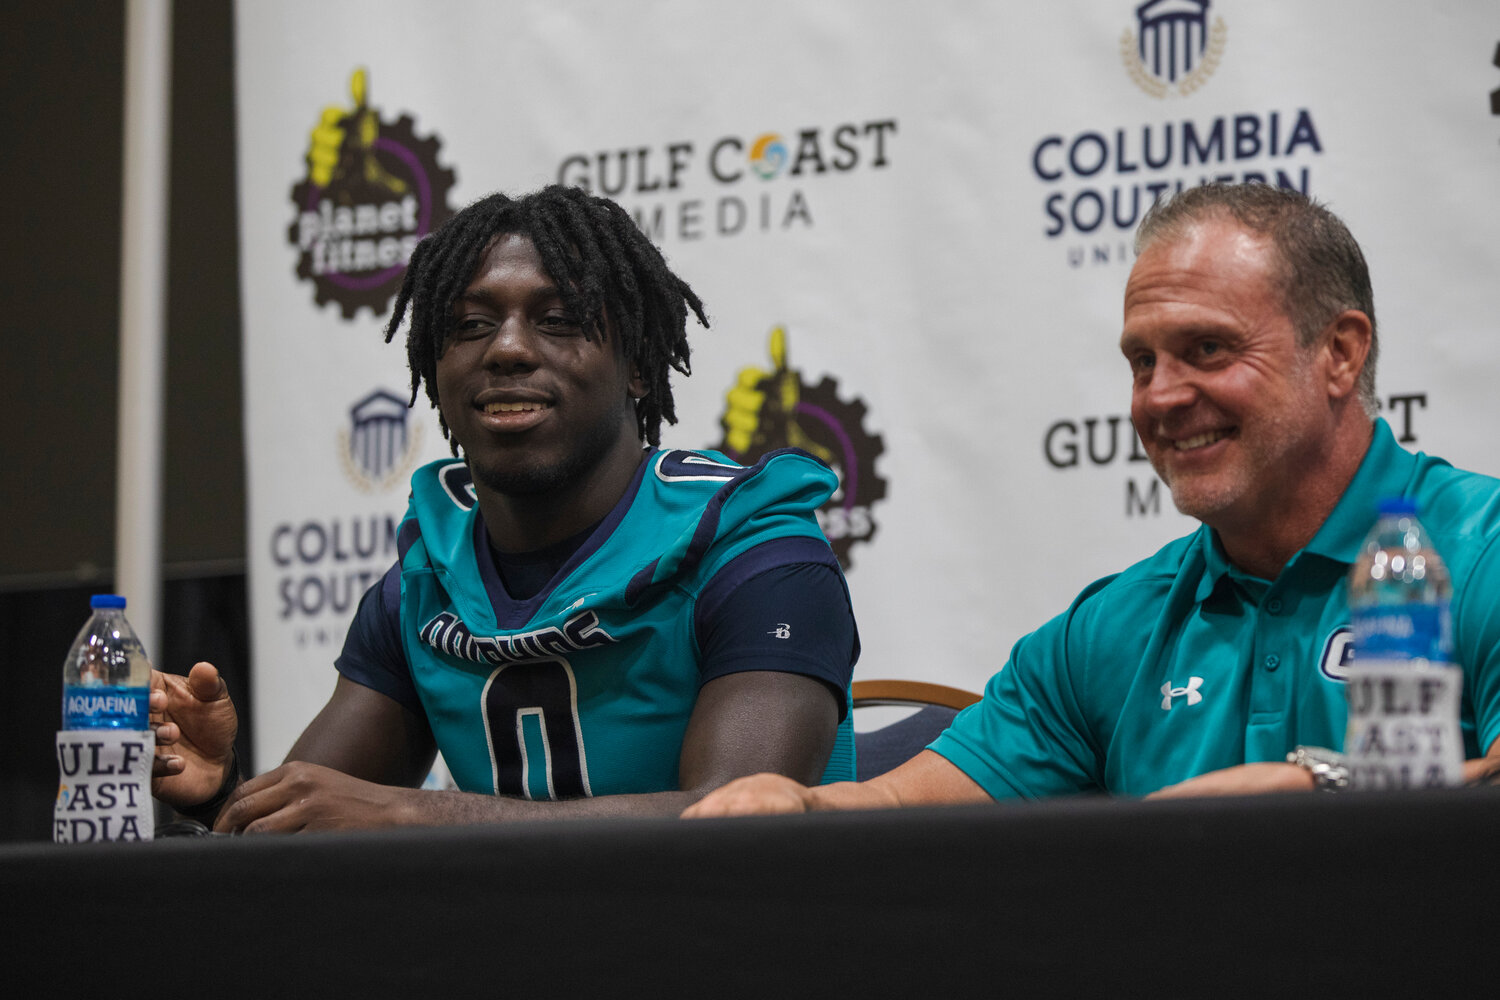 Gulf Shores senior Kingston Lowe and head coach Mark Hudspeth react to a question during the second-annual Gulf Coast Media Day on July 27. The Dolphins are set to kick off the regular season against St. Michael on Thursday at home.